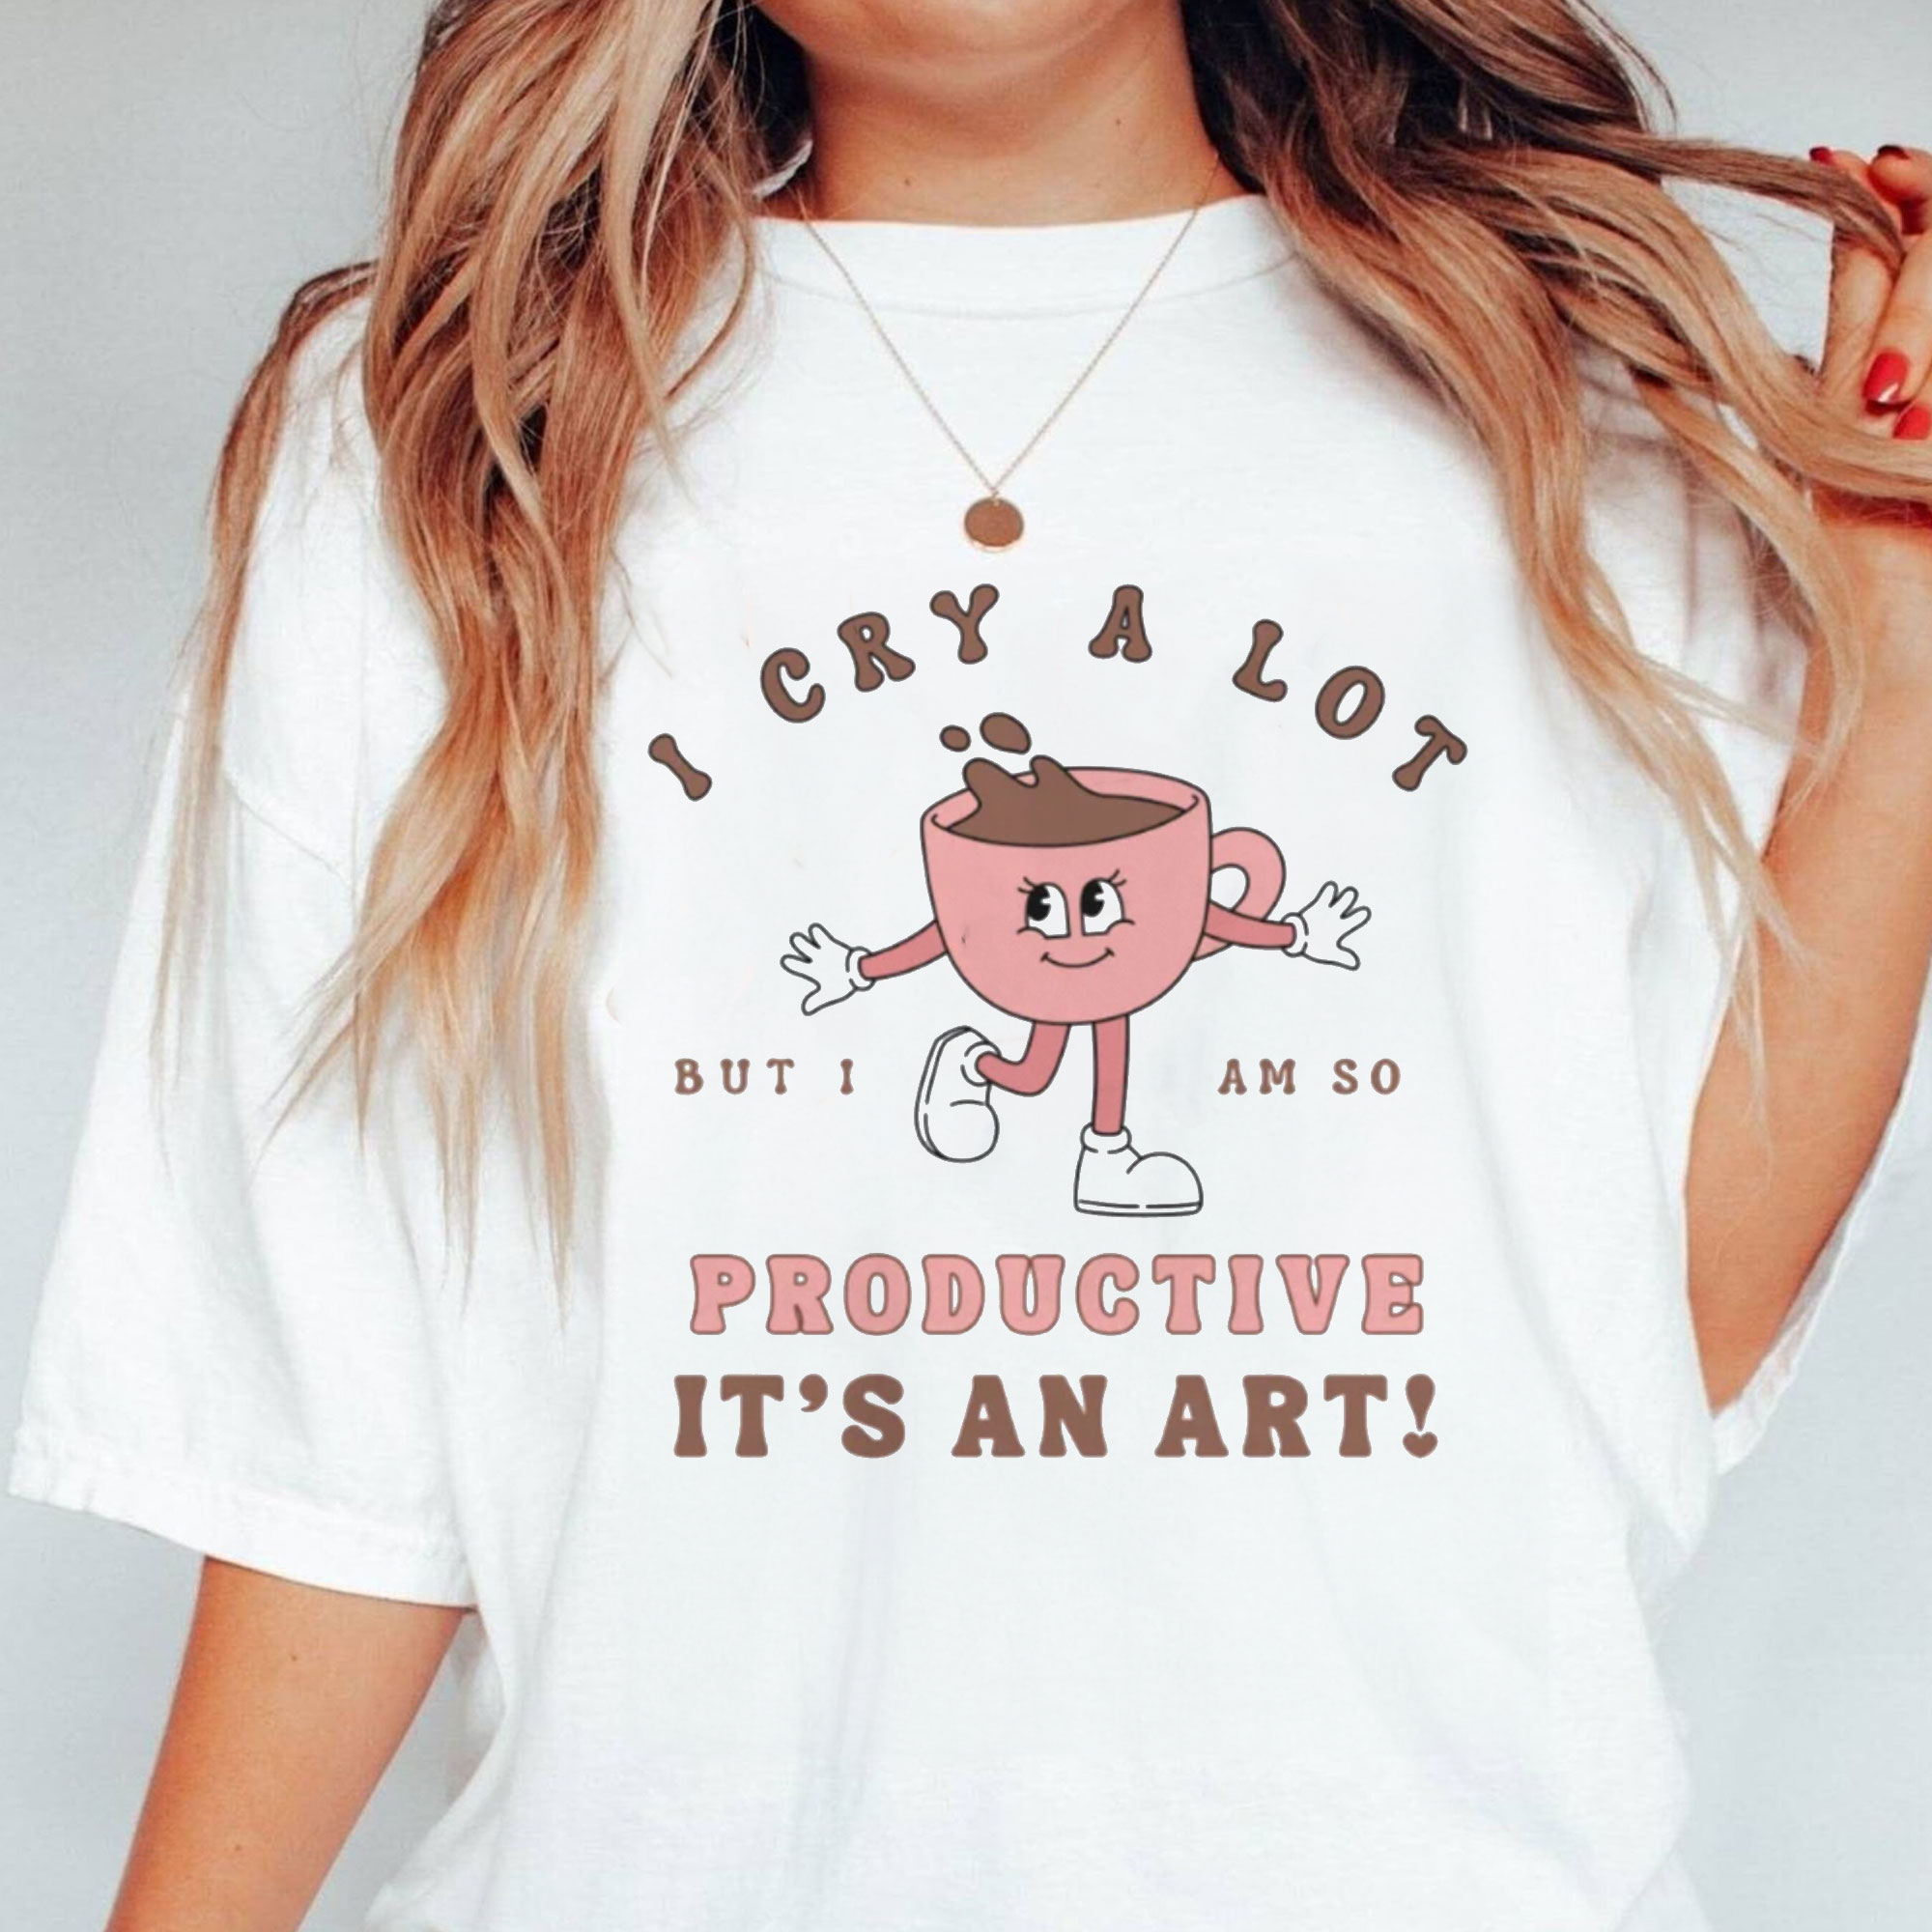 I Cry A Lot But I Am So Productive Swift Funny Shirt, TTPD Shirt, Swift Coffee